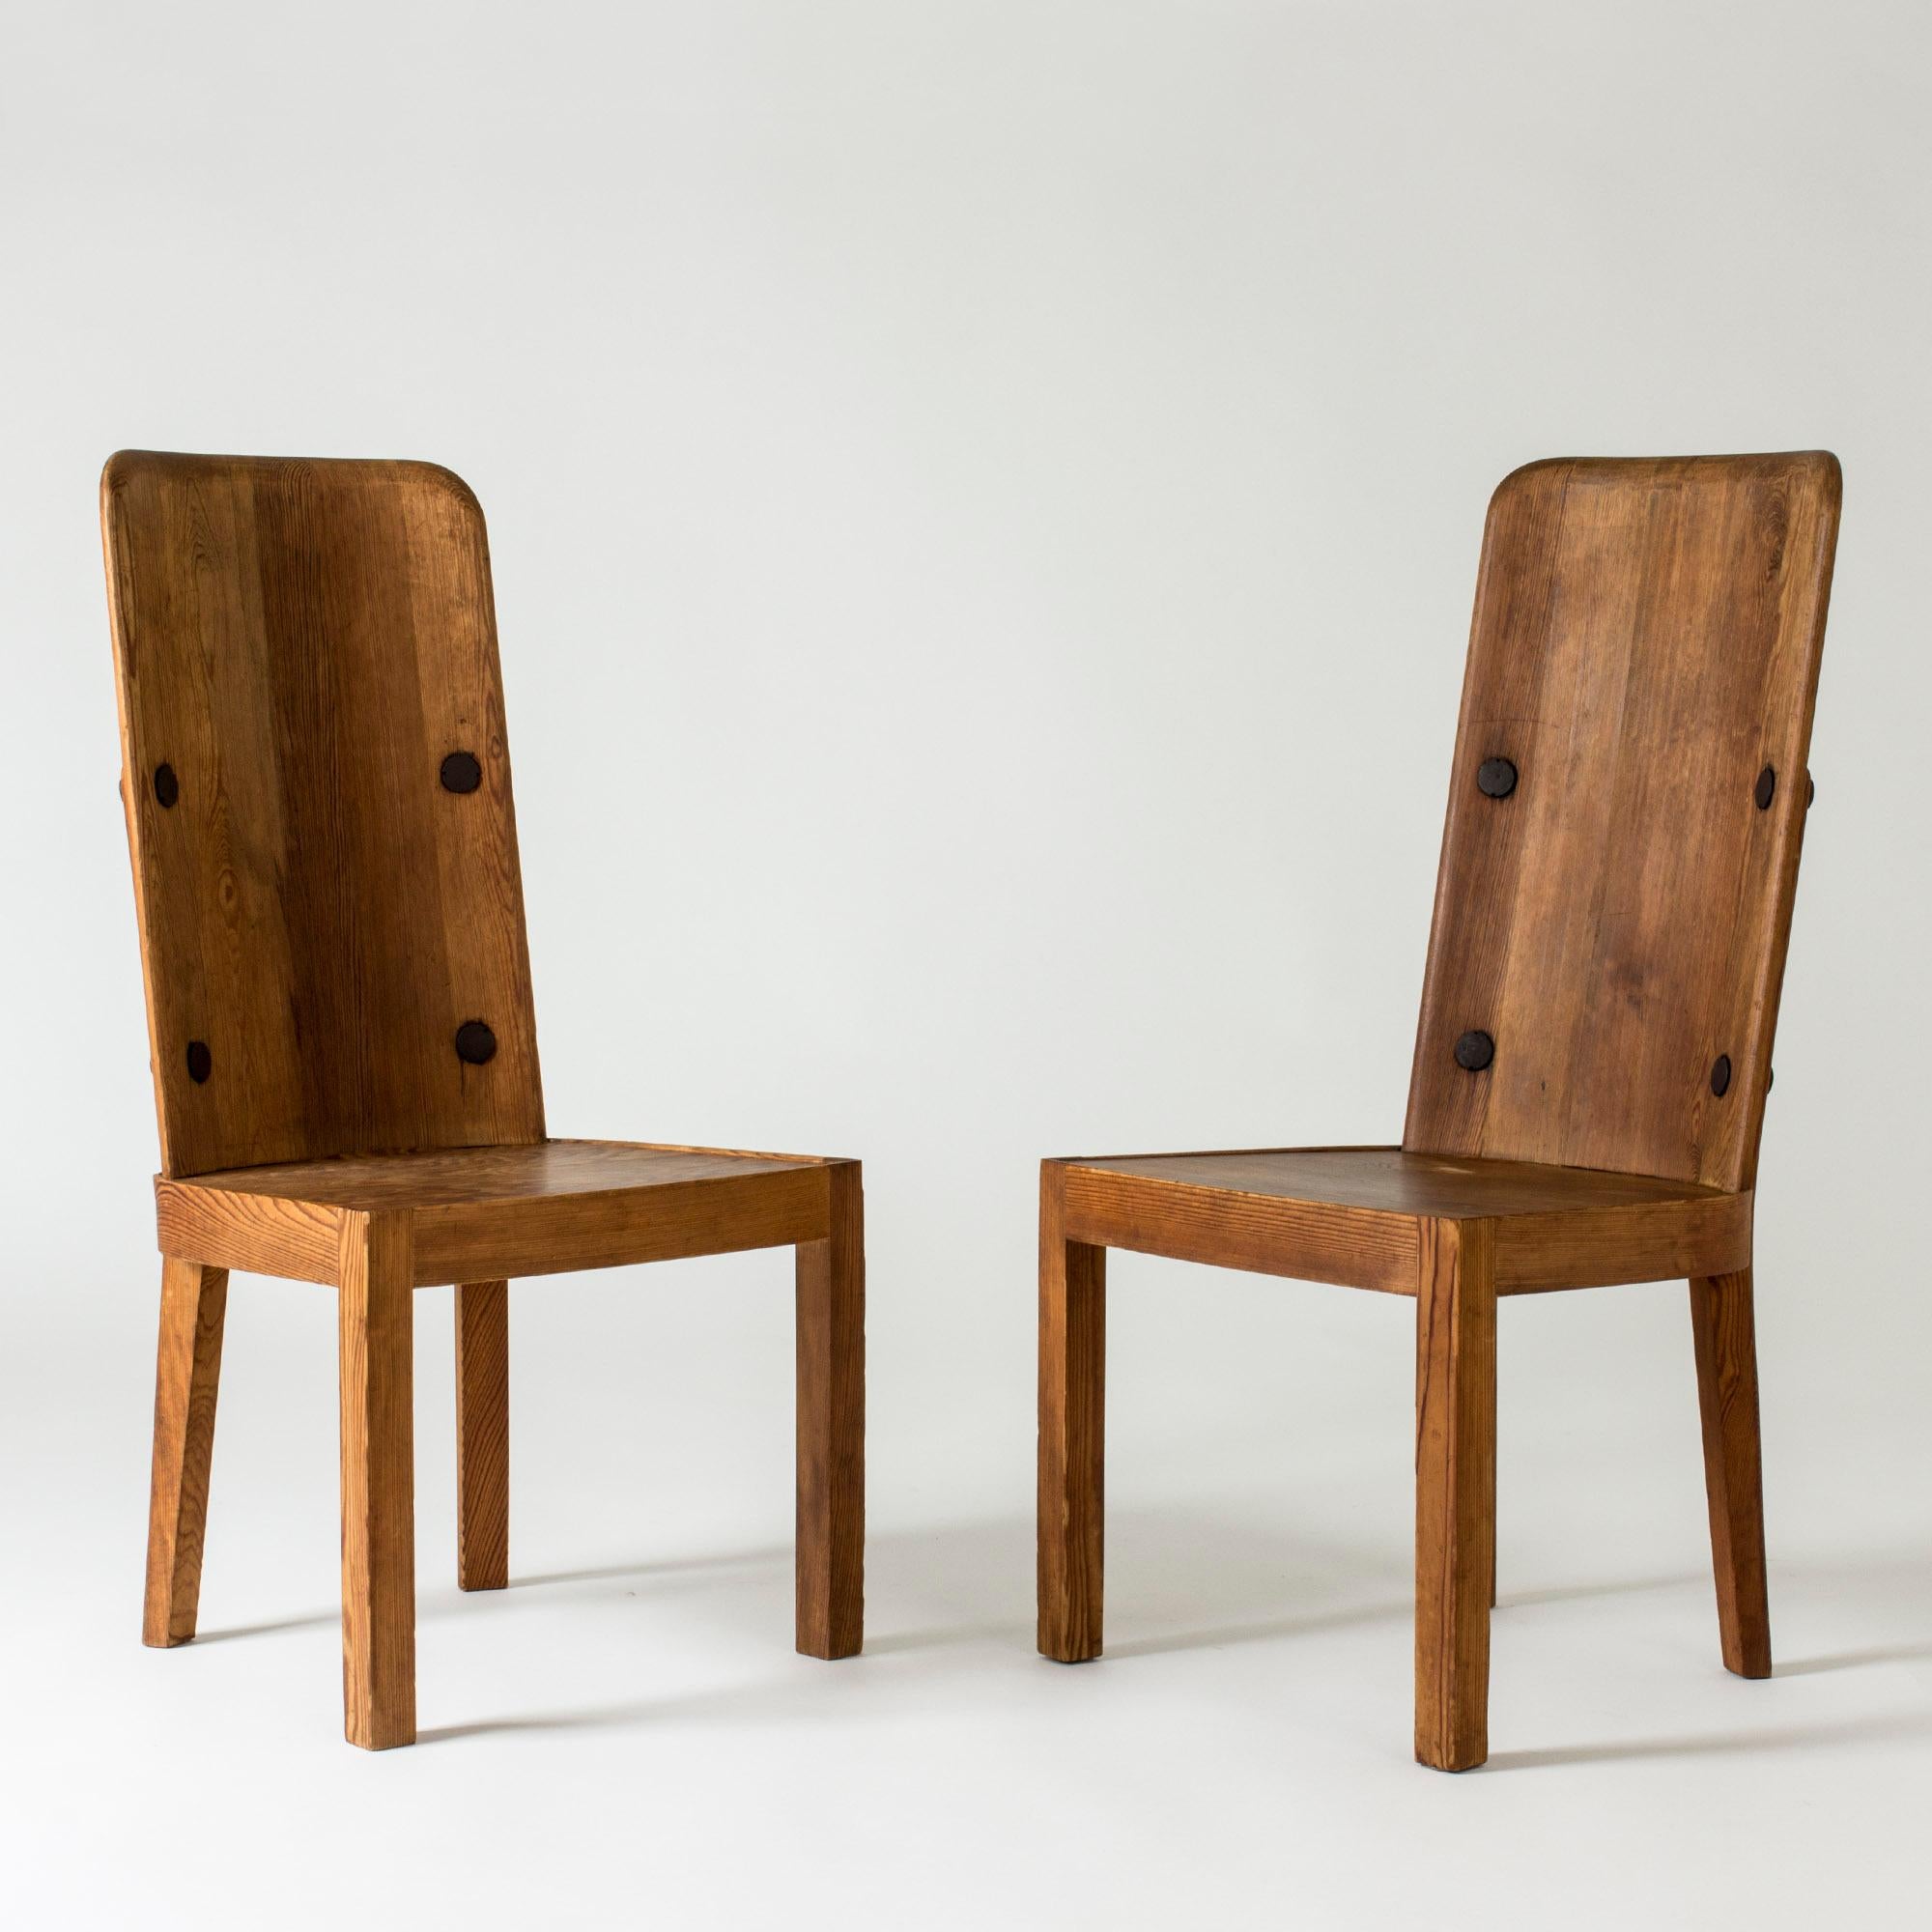 Pair of elegant “Lovö” dining chairs by Axel Einar Hjorth, made from pine. Beautiful design with clean lines and contrasting rustic wood.